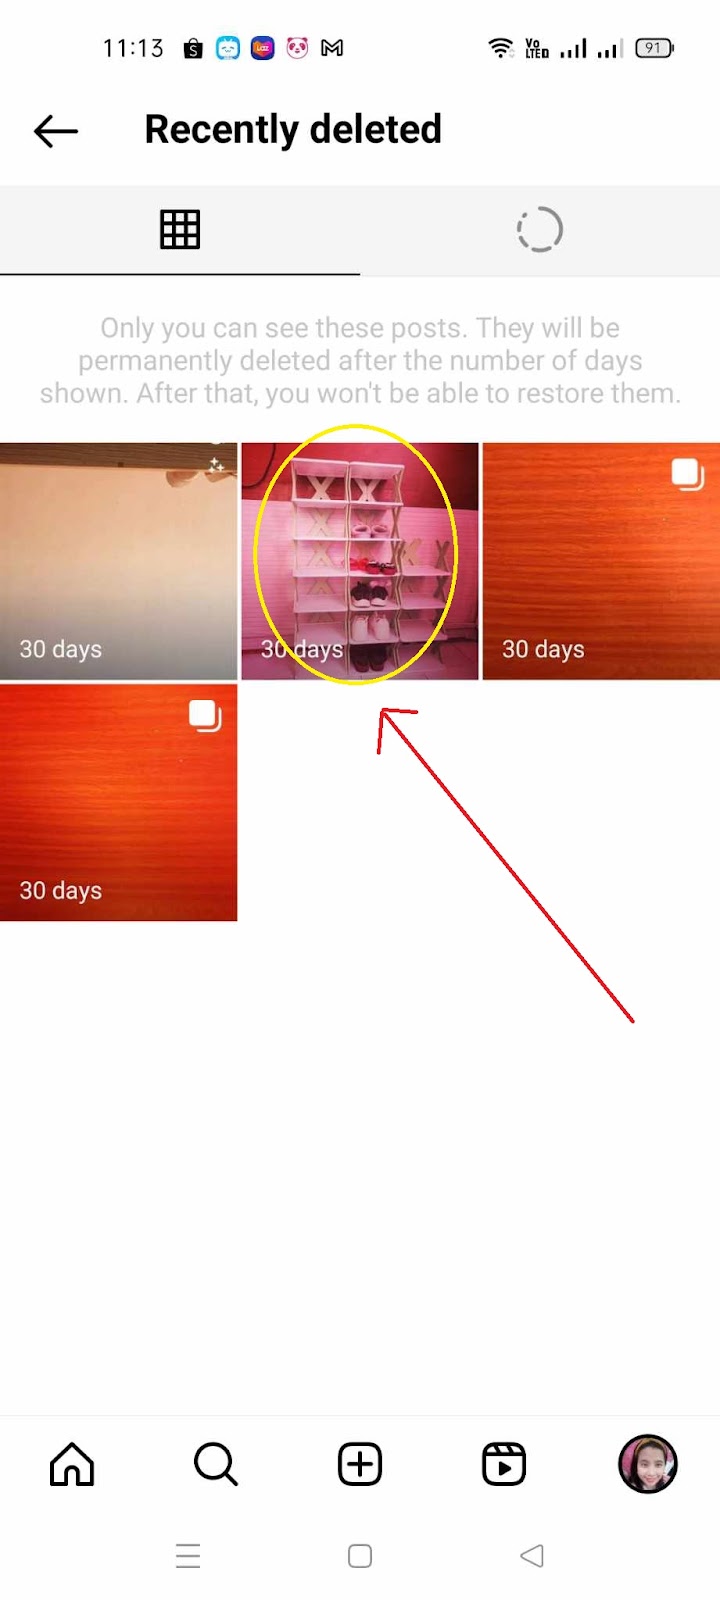 How to Rearrange Photos on Instagram Post - Select Photo to Restore